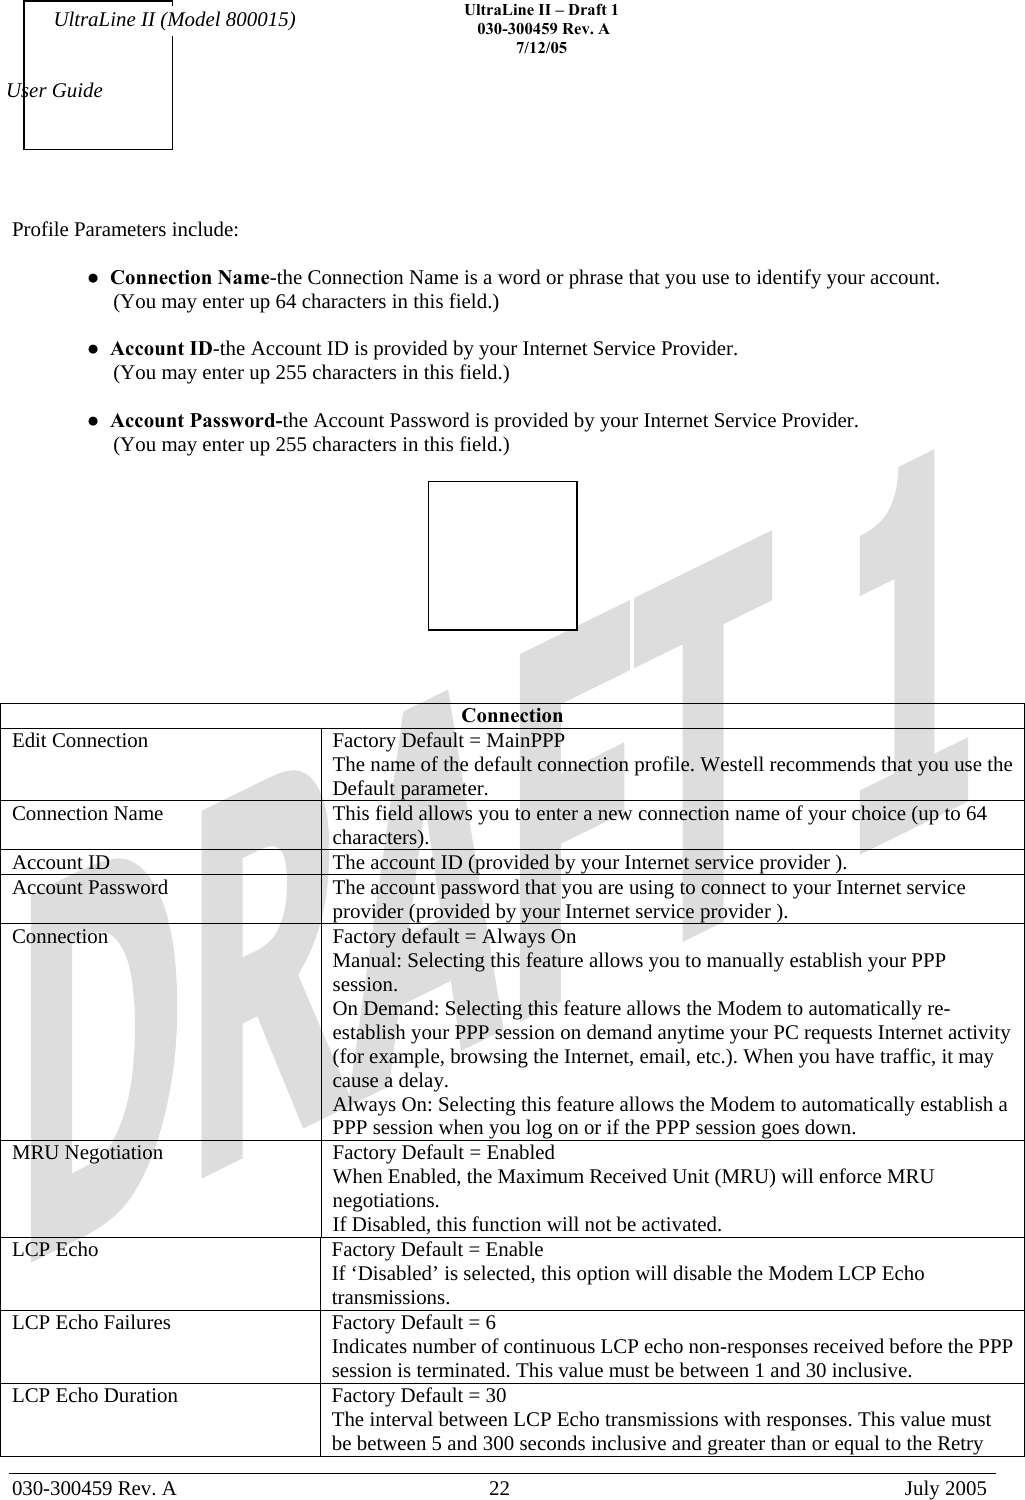    UltraLine II – Draft 1   030-300459 Rev. A 7/12/05   030-300459 Rev. A  22  July 2005  User Guide UltraLine II (Model 800015) Profile Parameters include:  ●  Connection Name-the Connection Name is a word or phrase that you use to identify your account.       (You may enter up 64 characters in this field.)   ●  Account ID-the Account ID is provided by your Internet Service Provider.      (You may enter up 255 characters in this field.)  ●  Account Password-the Account Password is provided by your Internet Service Provider.      (You may enter up 255 characters in this field.)      Connection Edit Connection  Factory Default = MainPPP The name of the default connection profile. Westell recommends that you use the Default parameter. Connection Name  This field allows you to enter a new connection name of your choice (up to 64 characters). Account ID  The account ID (provided by your Internet service provider ). Account Password  The account password that you are using to connect to your Internet service provider (provided by your Internet service provider ).  Connection  Factory default = Always On Manual: Selecting this feature allows you to manually establish your PPP session. On Demand: Selecting this feature allows the Modem to automatically re-establish your PPP session on demand anytime your PC requests Internet activity (for example, browsing the Internet, email, etc.). When you have traffic, it may cause a delay. Always On: Selecting this feature allows the Modem to automatically establish a PPP session when you log on or if the PPP session goes down. MRU Negotiation  Factory Default = Enabled When Enabled, the Maximum Received Unit (MRU) will enforce MRU negotiations.  If Disabled, this function will not be activated. LCP Echo  Factory Default = Enable If ‘Disabled’ is selected, this option will disable the Modem LCP Echo transmissions. LCP Echo Failures  Factory Default = 6 Indicates number of continuous LCP echo non-responses received before the PPP session is terminated. This value must be between 1 and 30 inclusive. LCP Echo Duration  Factory Default = 30 The interval between LCP Echo transmissions with responses. This value must be between 5 and 300 seconds inclusive and greater than or equal to the Retry 